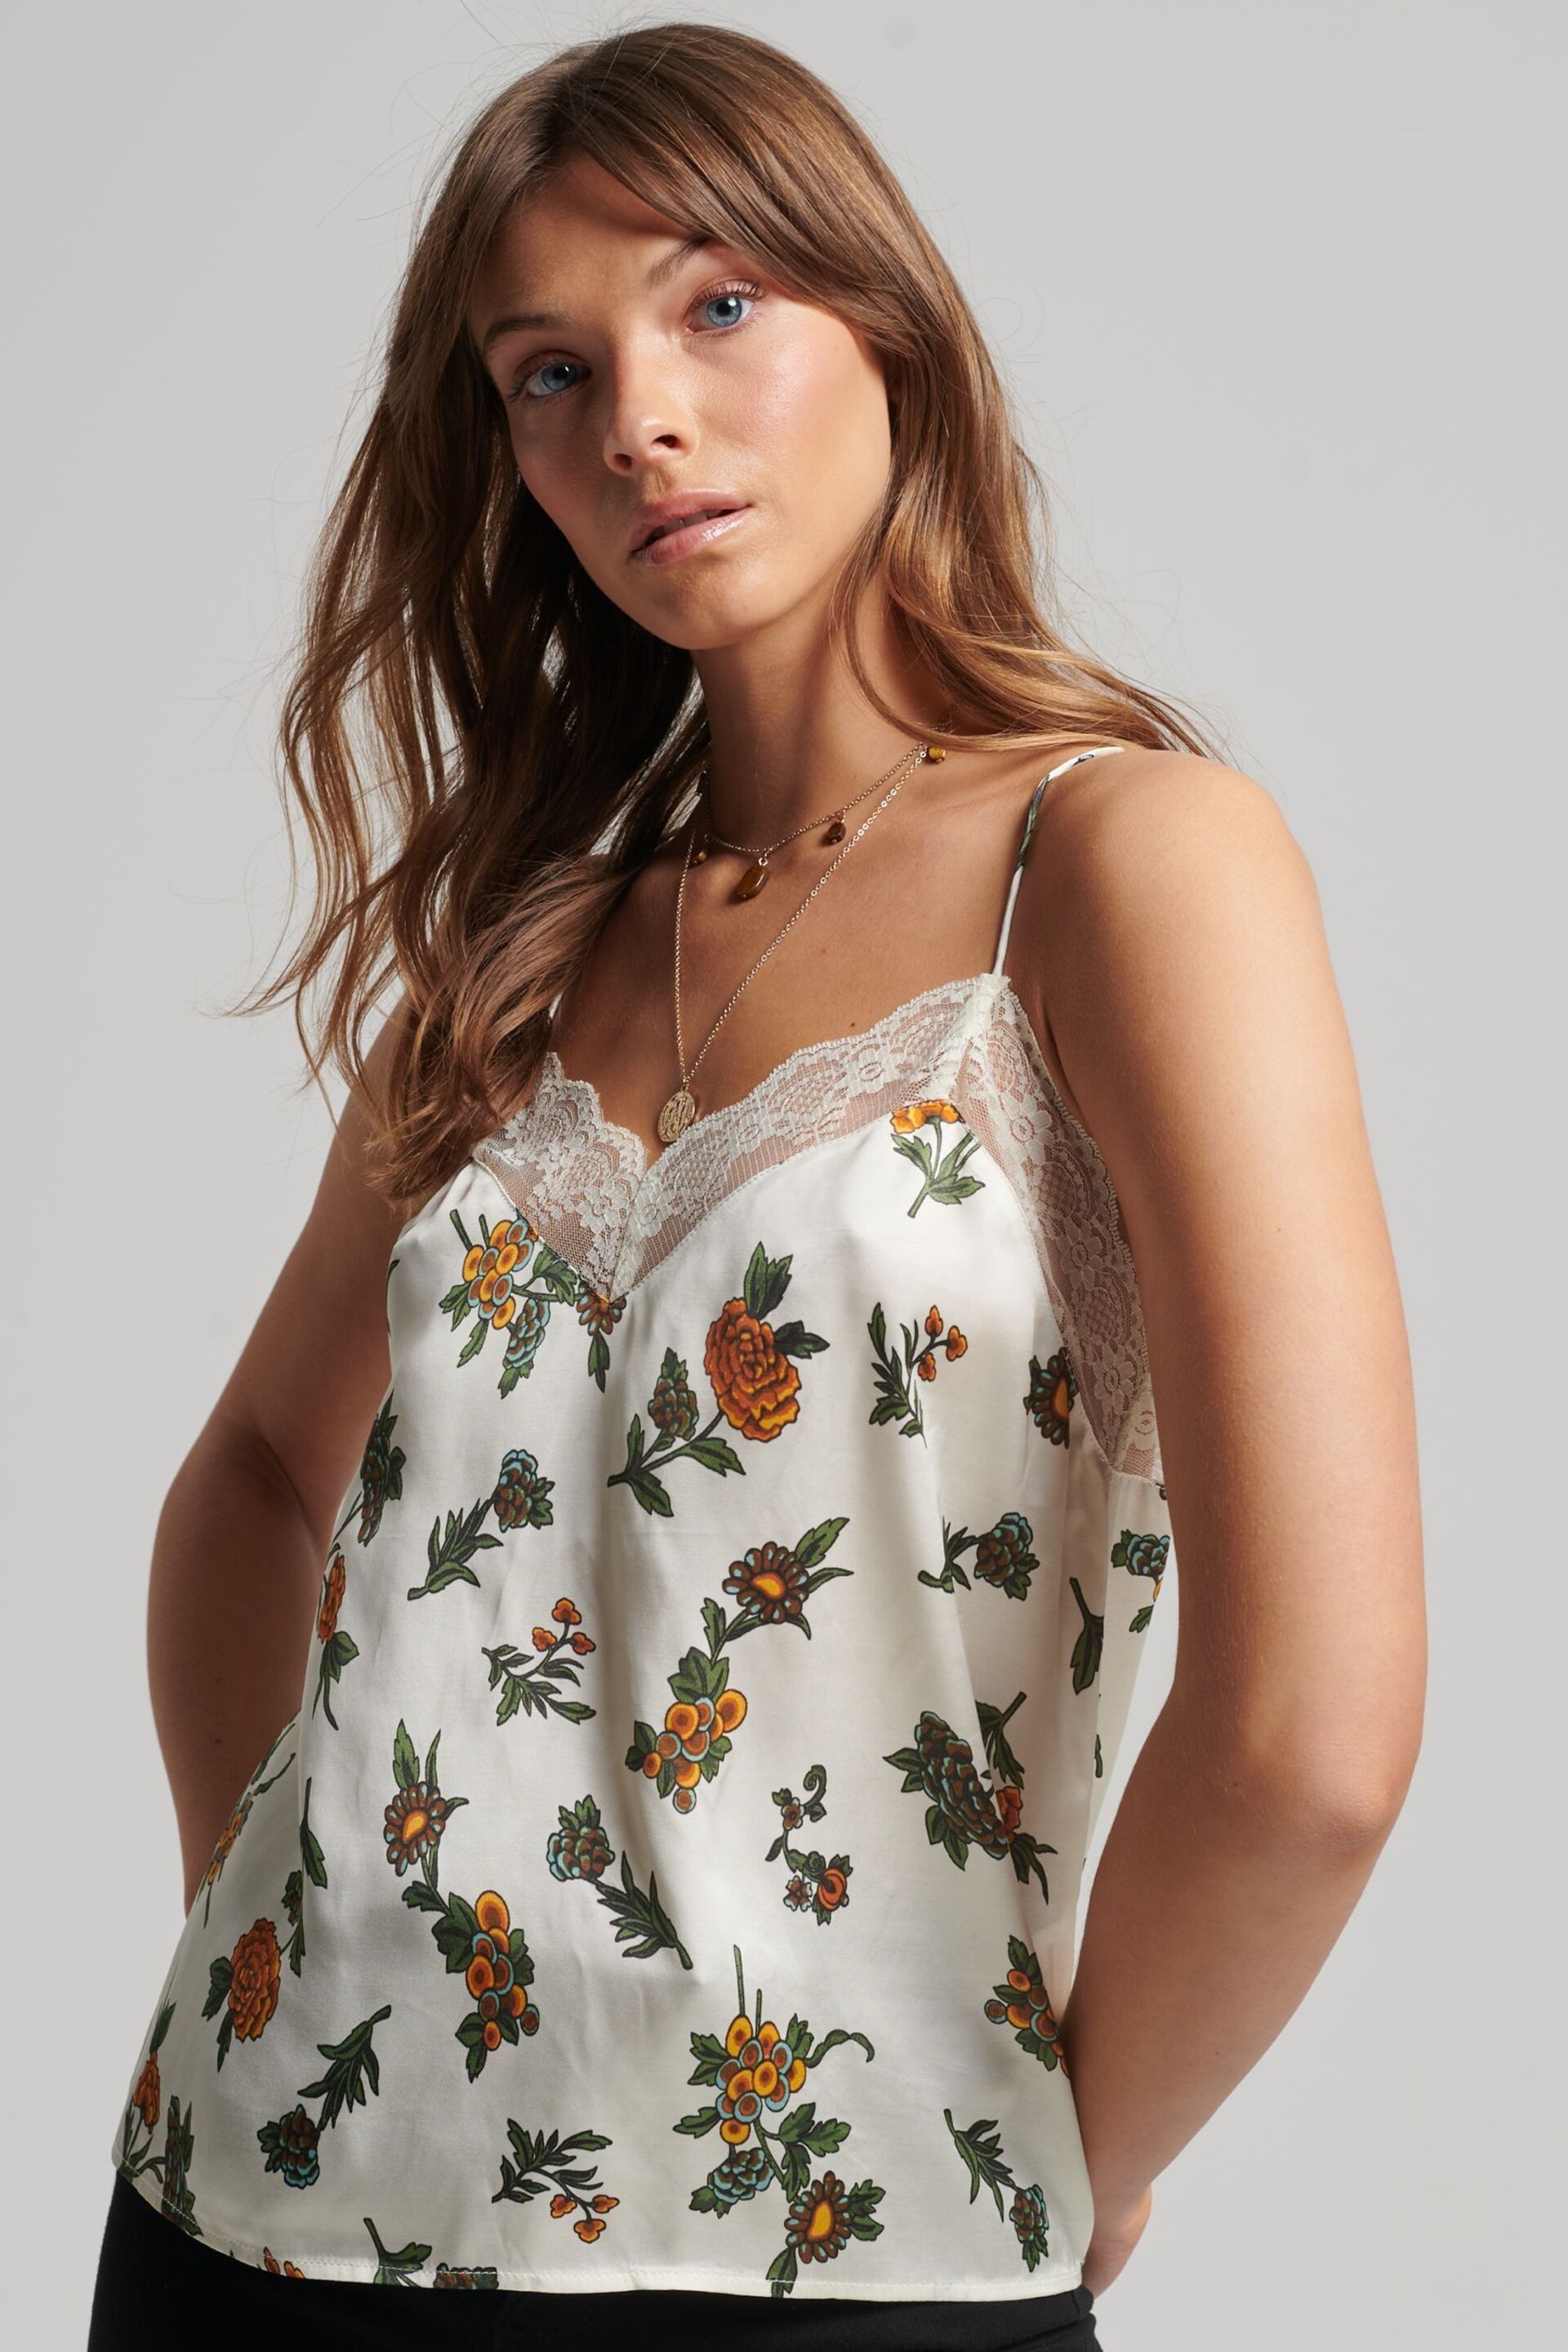 Superdry White Satin Cami Top - Image 1 of 5